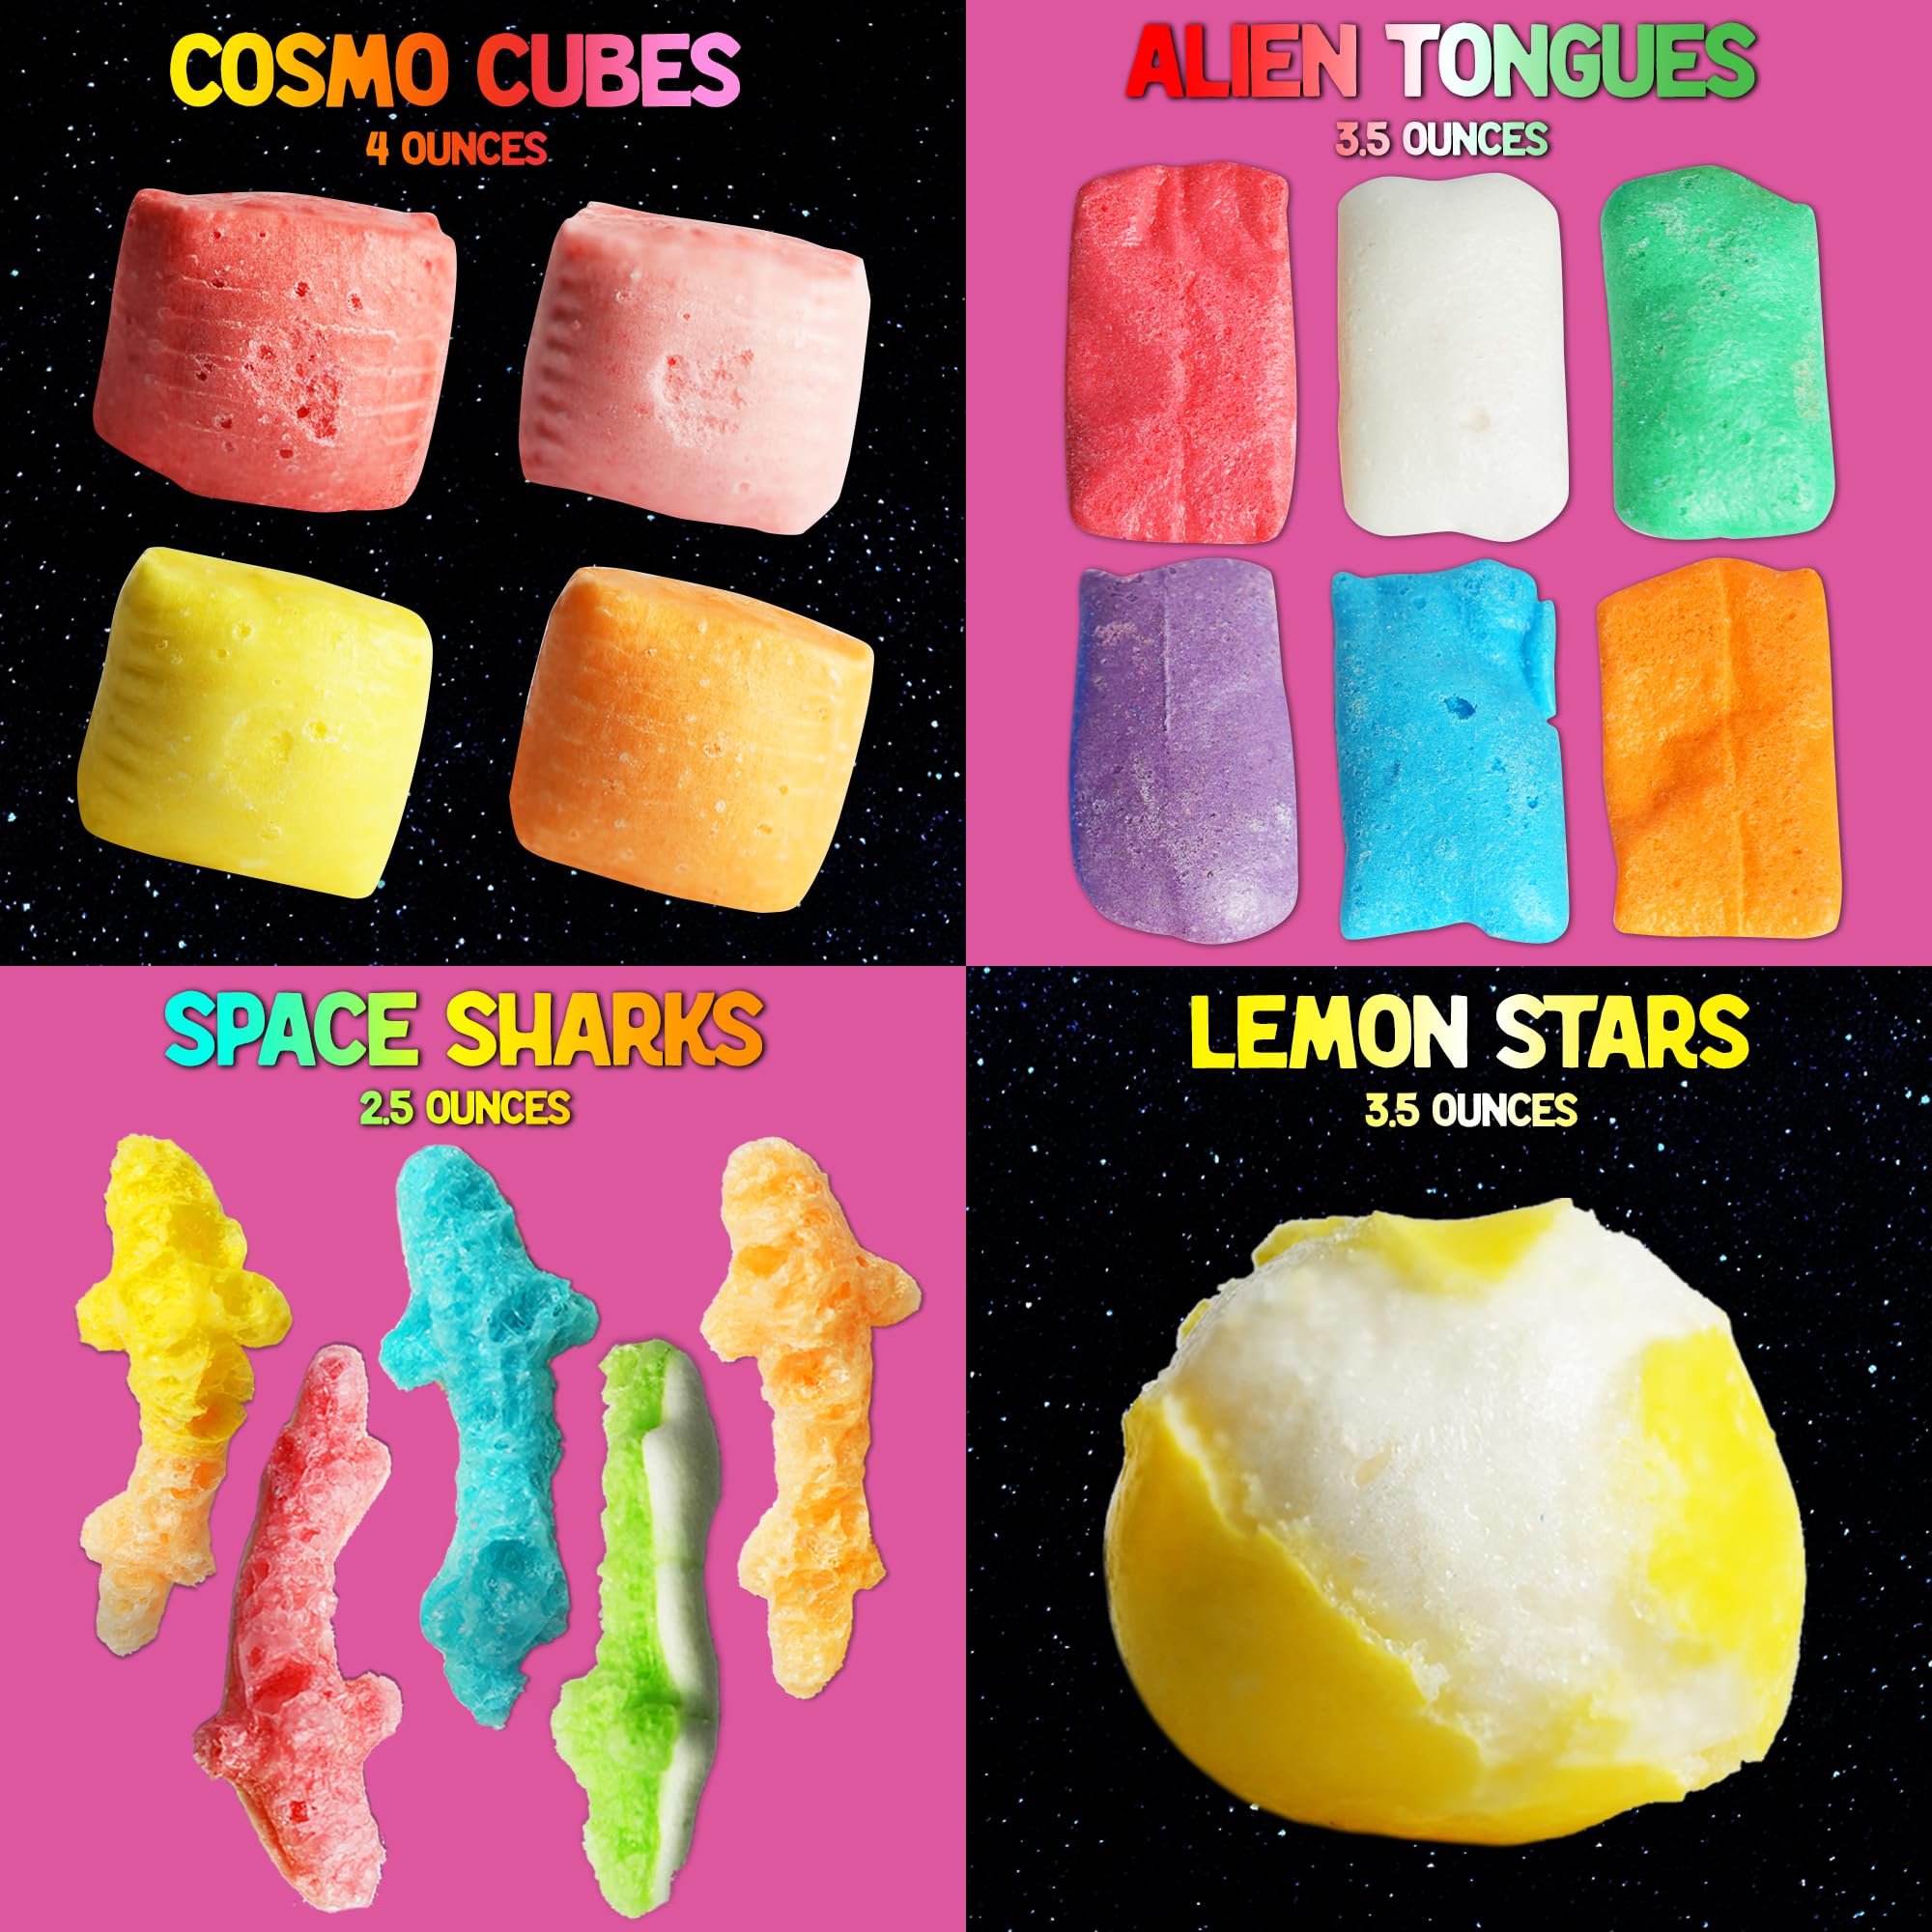 UFO Variety Pack - 9 Kinds of Premium Freeze Dried Candy - Cosmic Crunchies, Moon Clouds, Space Sharks, Alien Tongues, Lemon Stars and More - Shipped in a UFO Box with Fun Stickers (9 Pack)